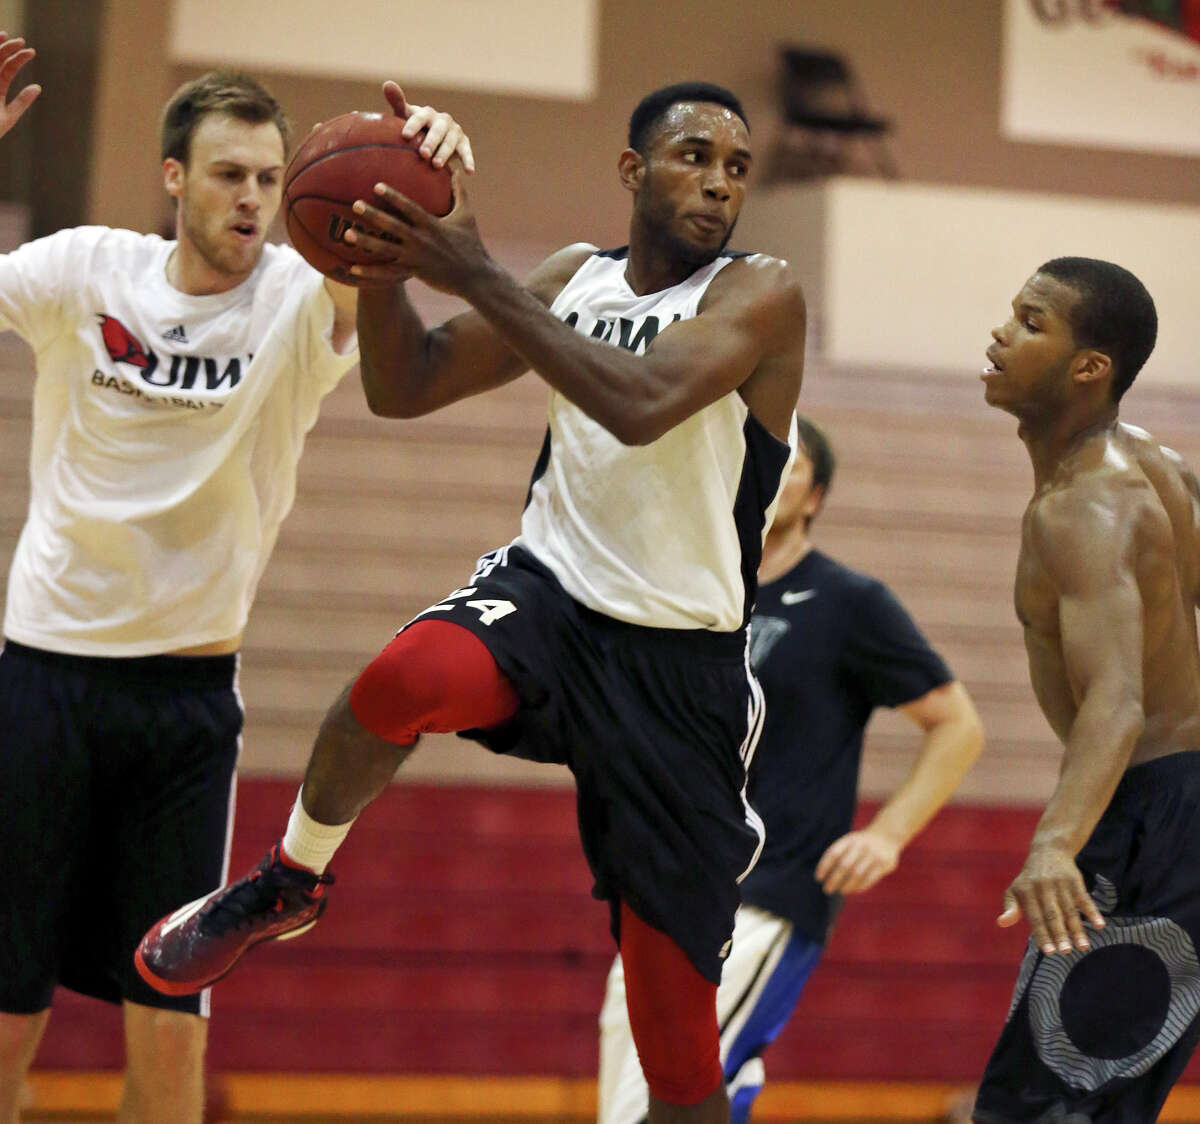 University of the Incarnate Word’s Phillip Johnson (center) looks to pass between University of the Incarnate Word’s Jerred Kite (left) and University of the Incarnate Word’s Shawn Johnson during a workout Monday June 29, 2015 at the McDermott Center.